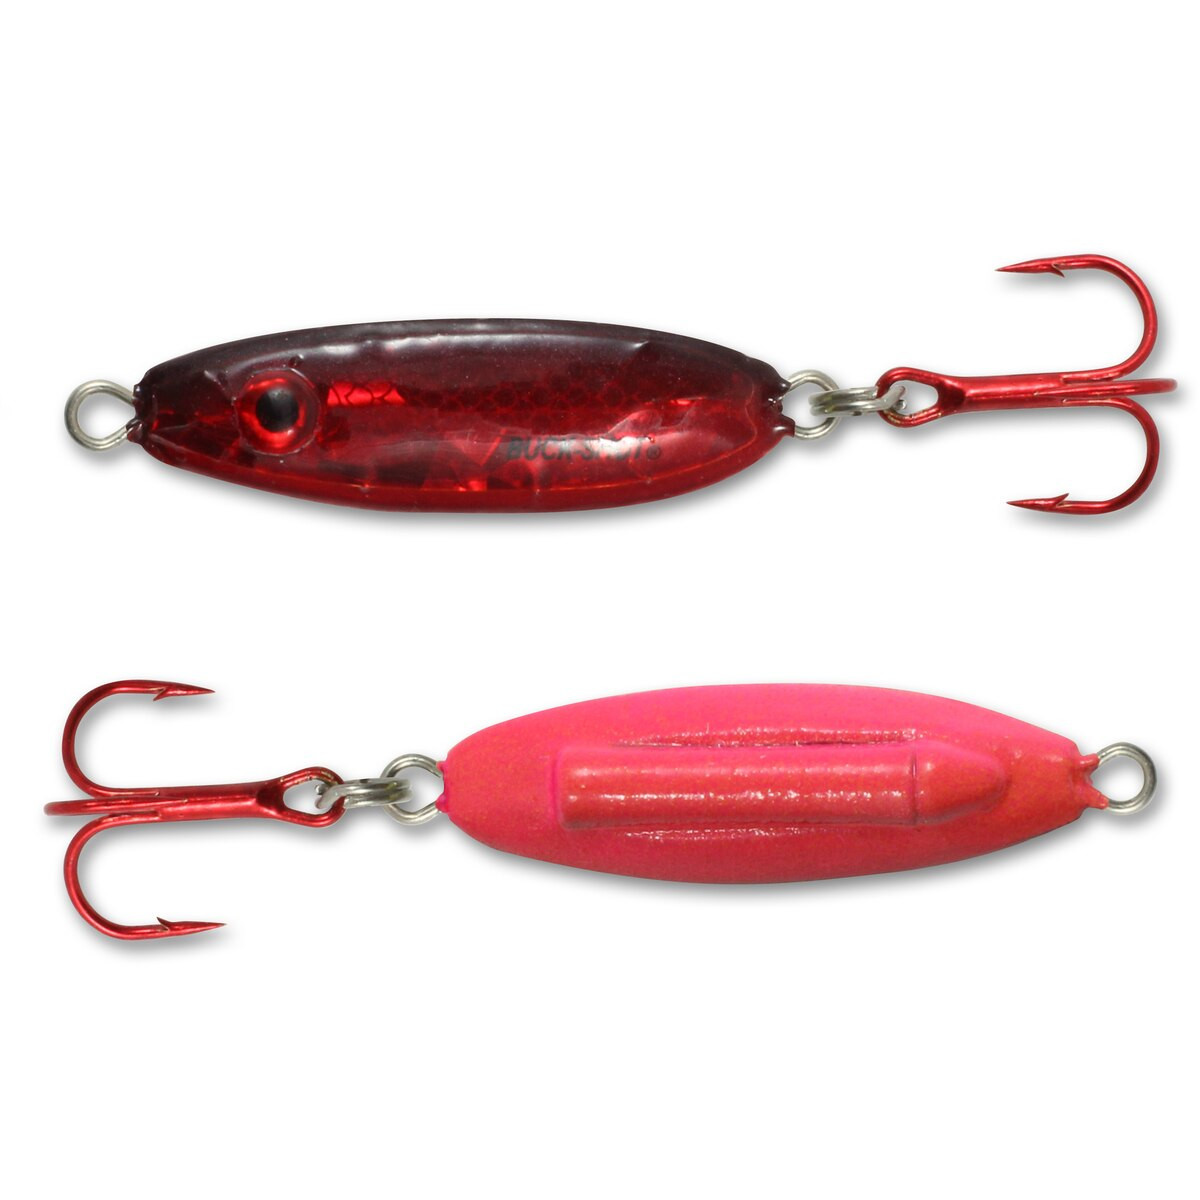 https://cs1.0ps.us/original/opplanet-northland-fishing-tackle-buck-shot-rattle-spoon-lure-s-glo-redfish-3-8-oz-brs5-93-main